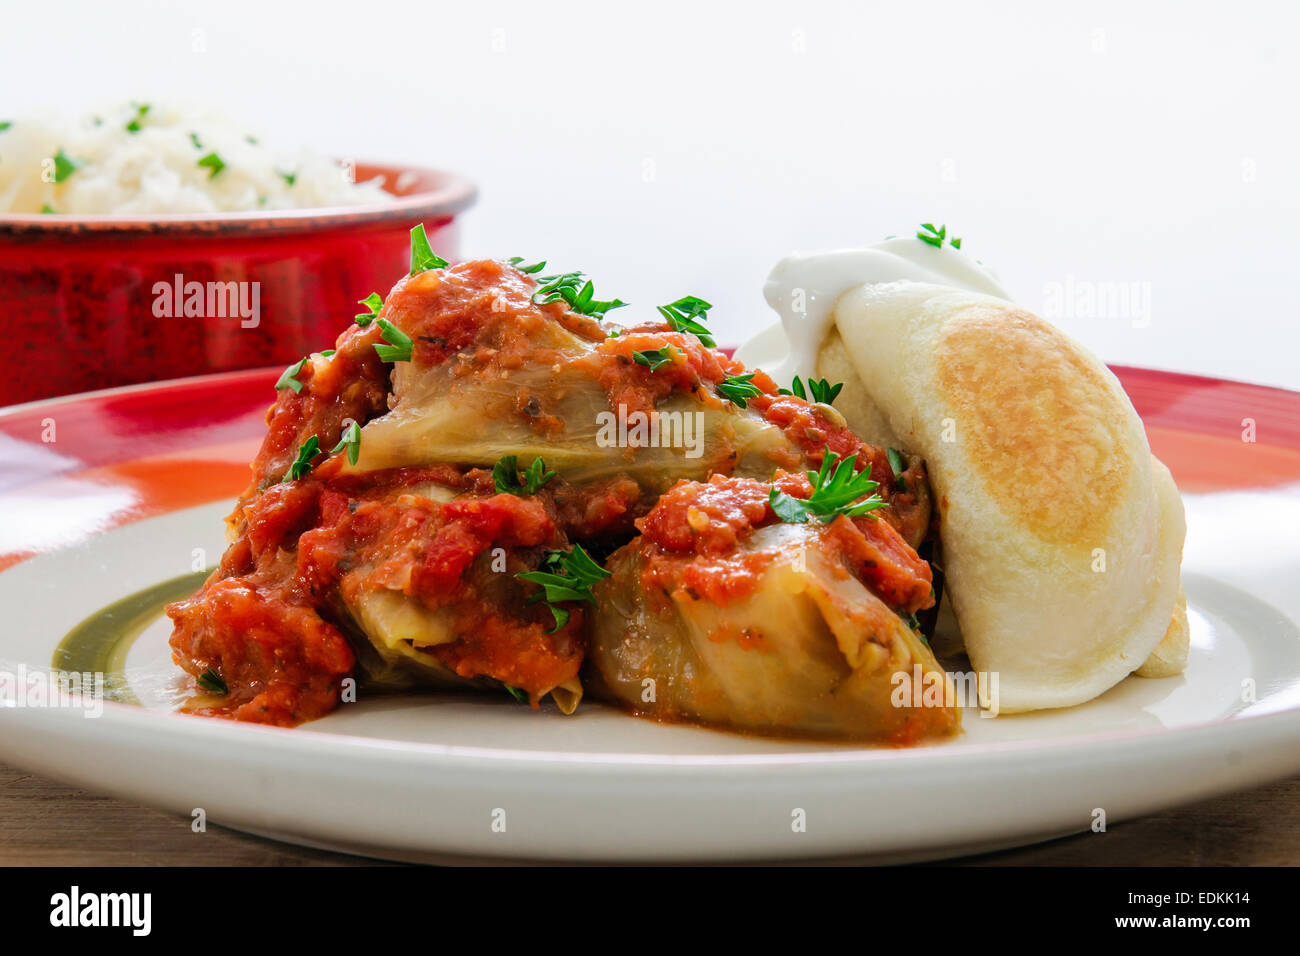 Authentic Homemade Polish cabbage rolls and perogies Stock Photo